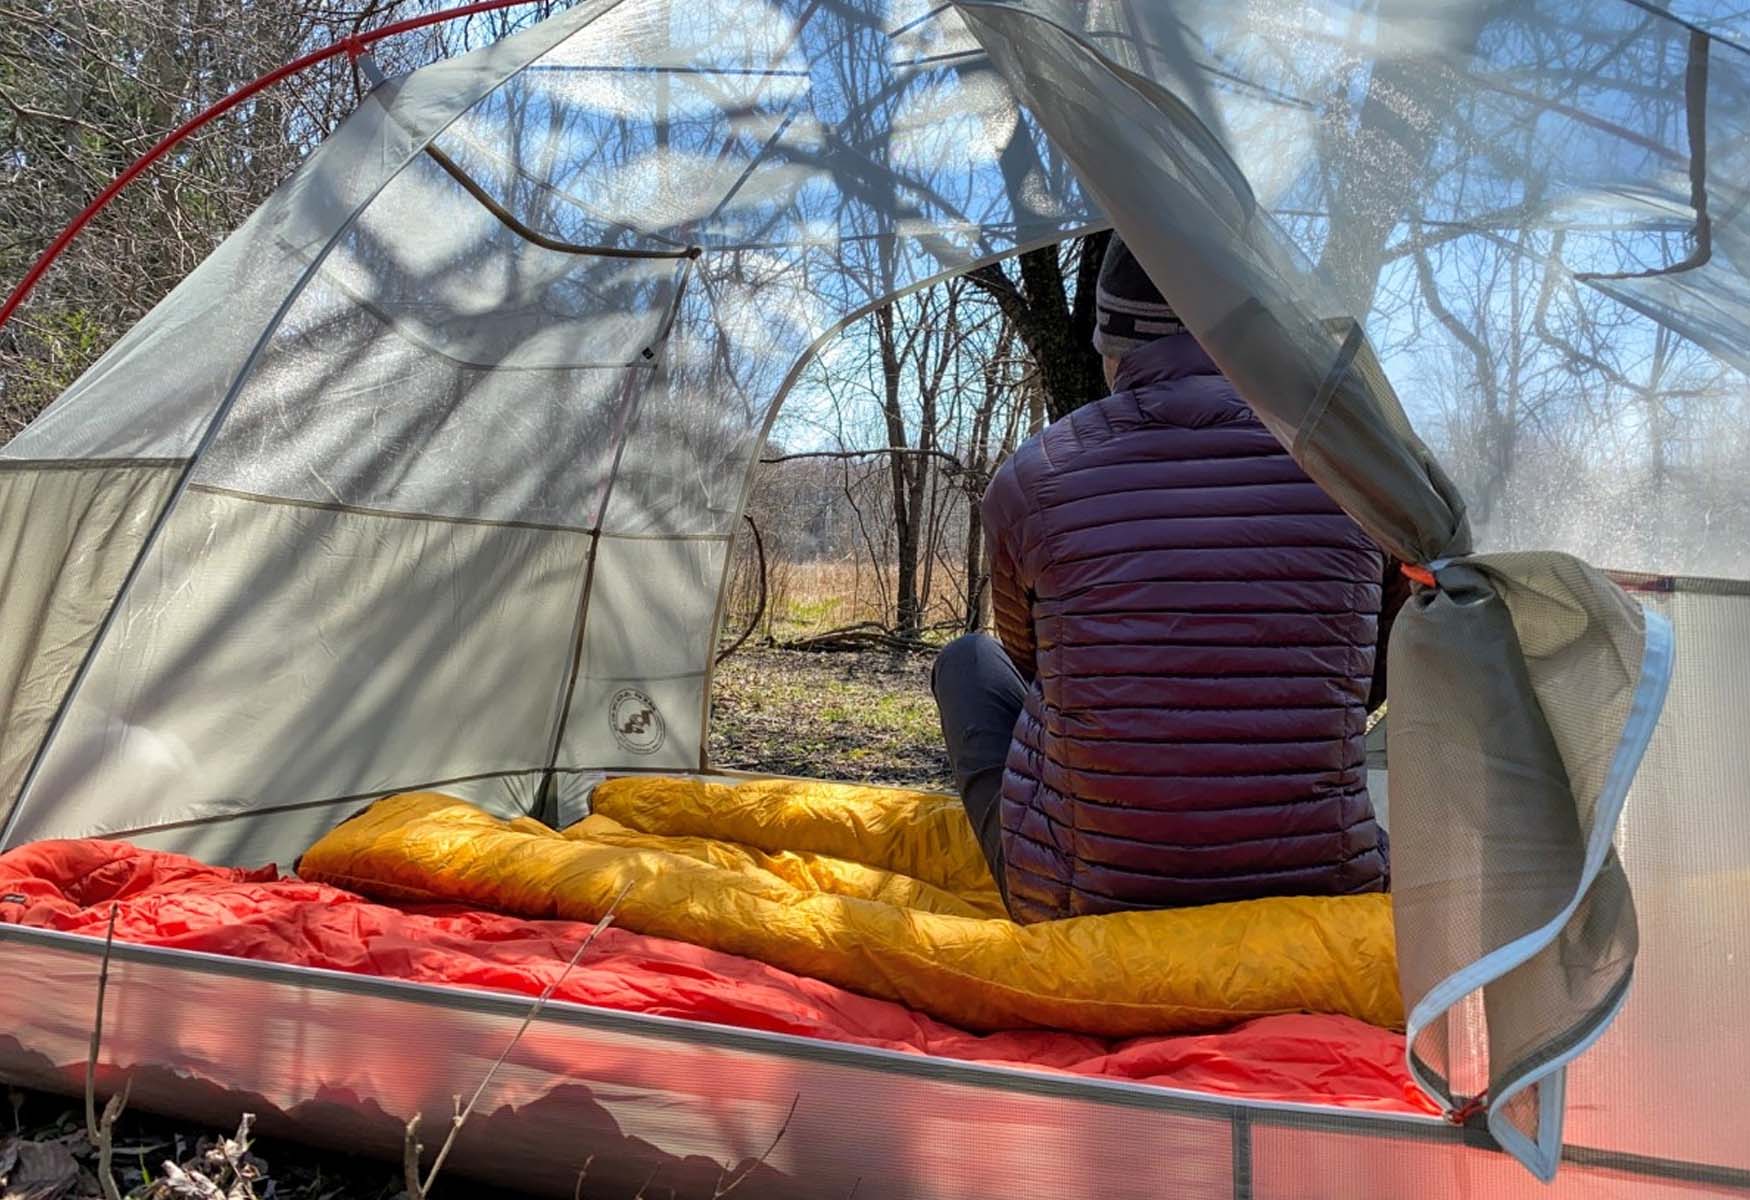 Big Agnes Copper Spur UL2 Review: Best Ultralight Tent From Big Agnes?